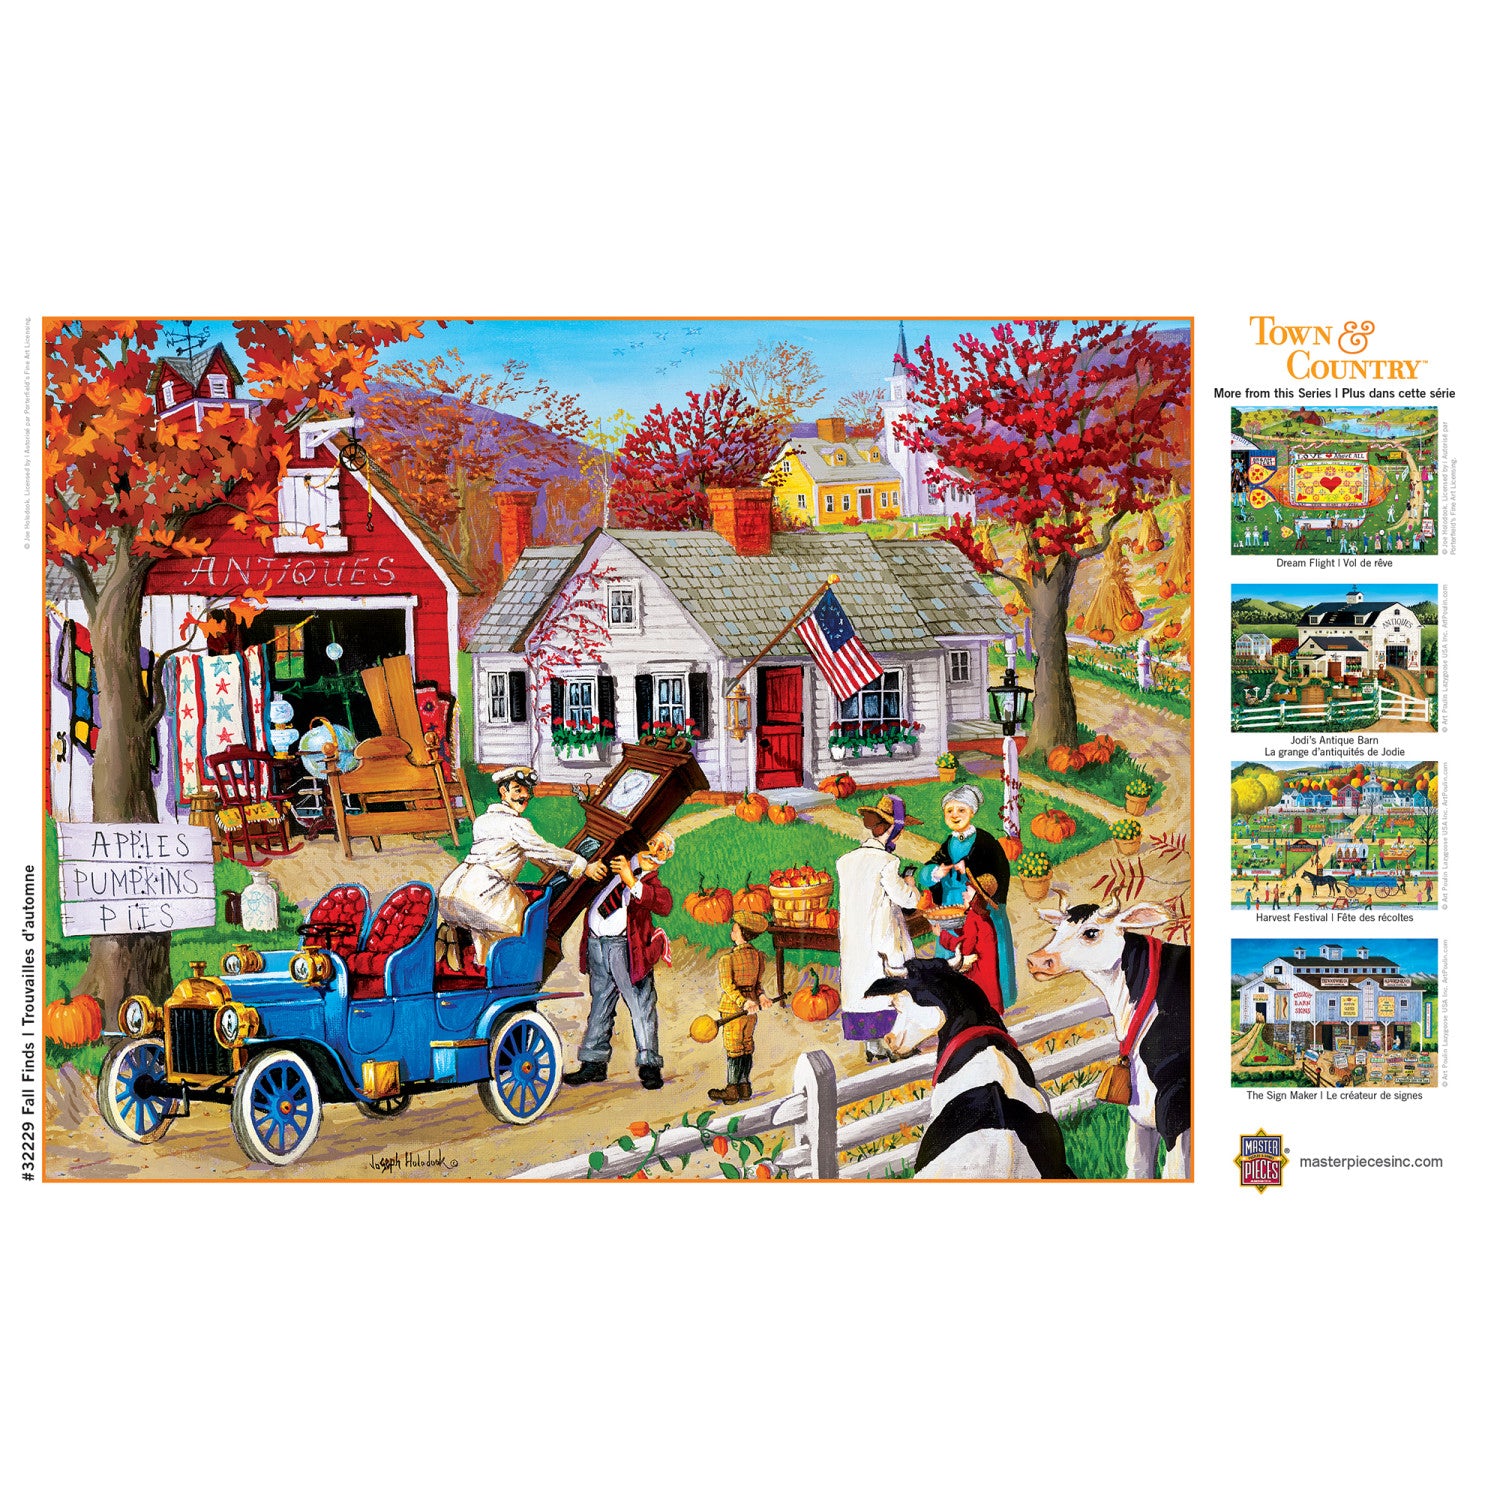 Town & Country - Fall Finds 300 Piece EZ Grip Jigsaw Puzzle